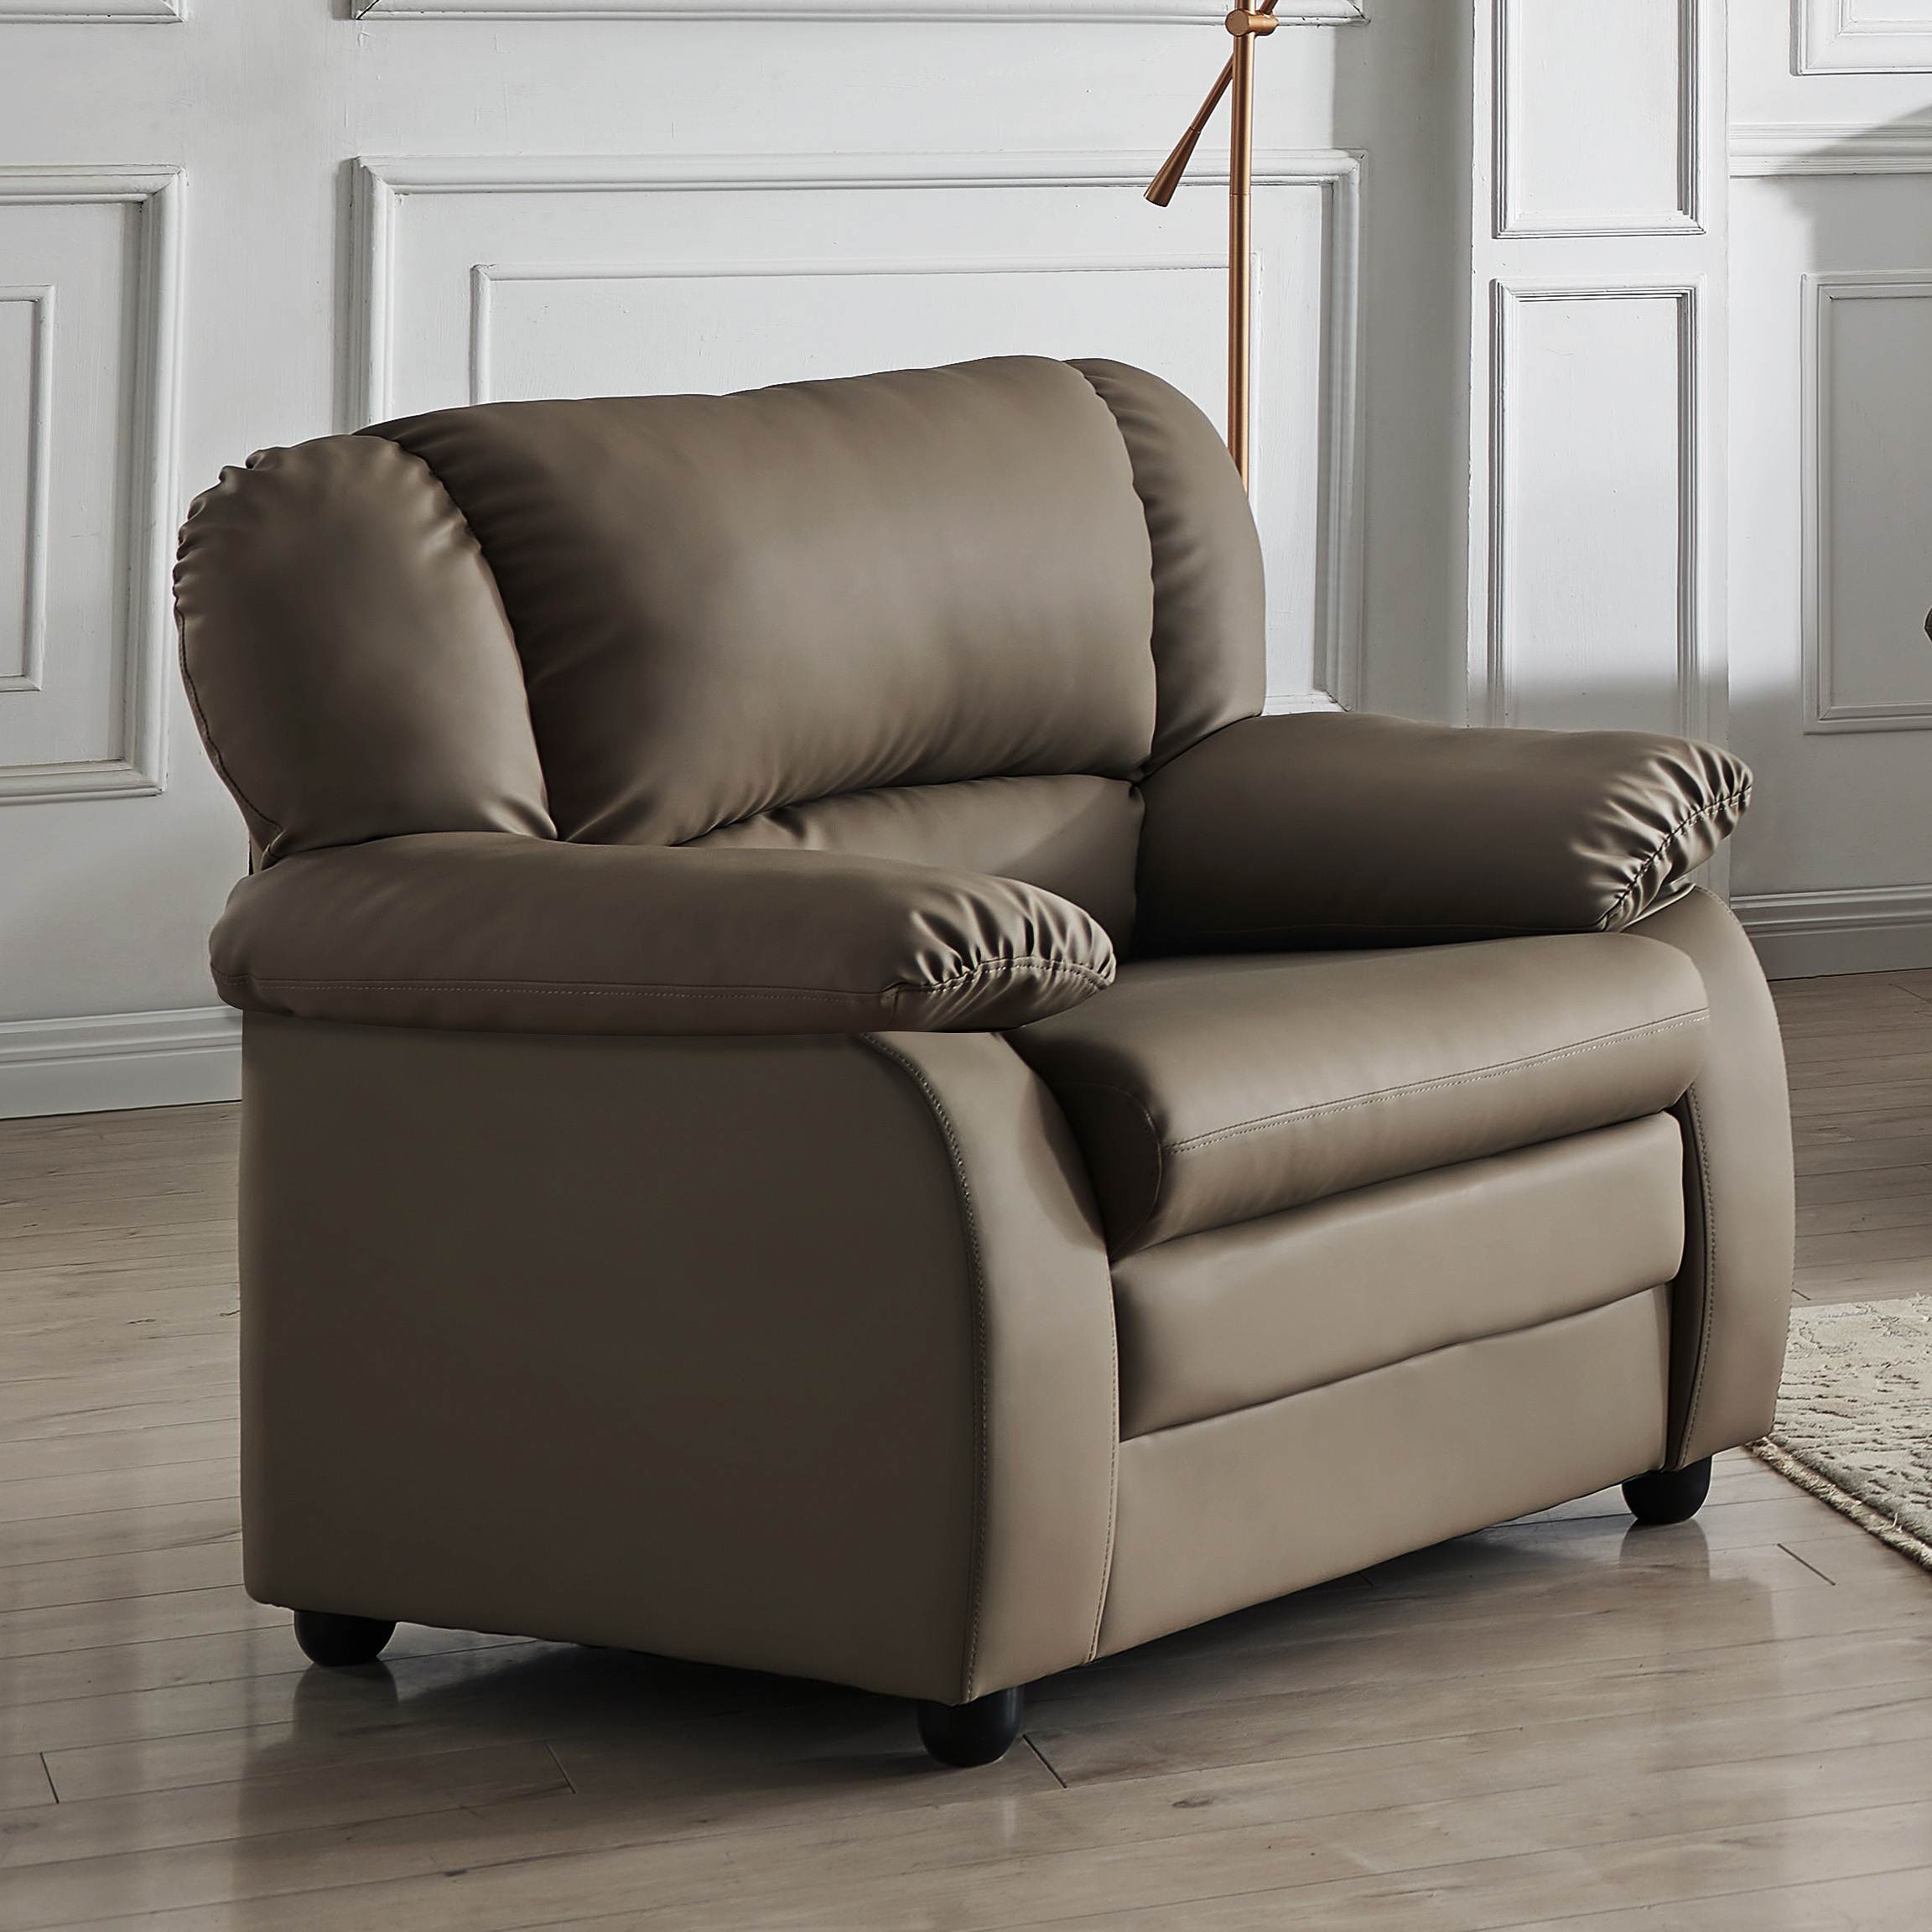 Abanda Leather Chair (Taupe)